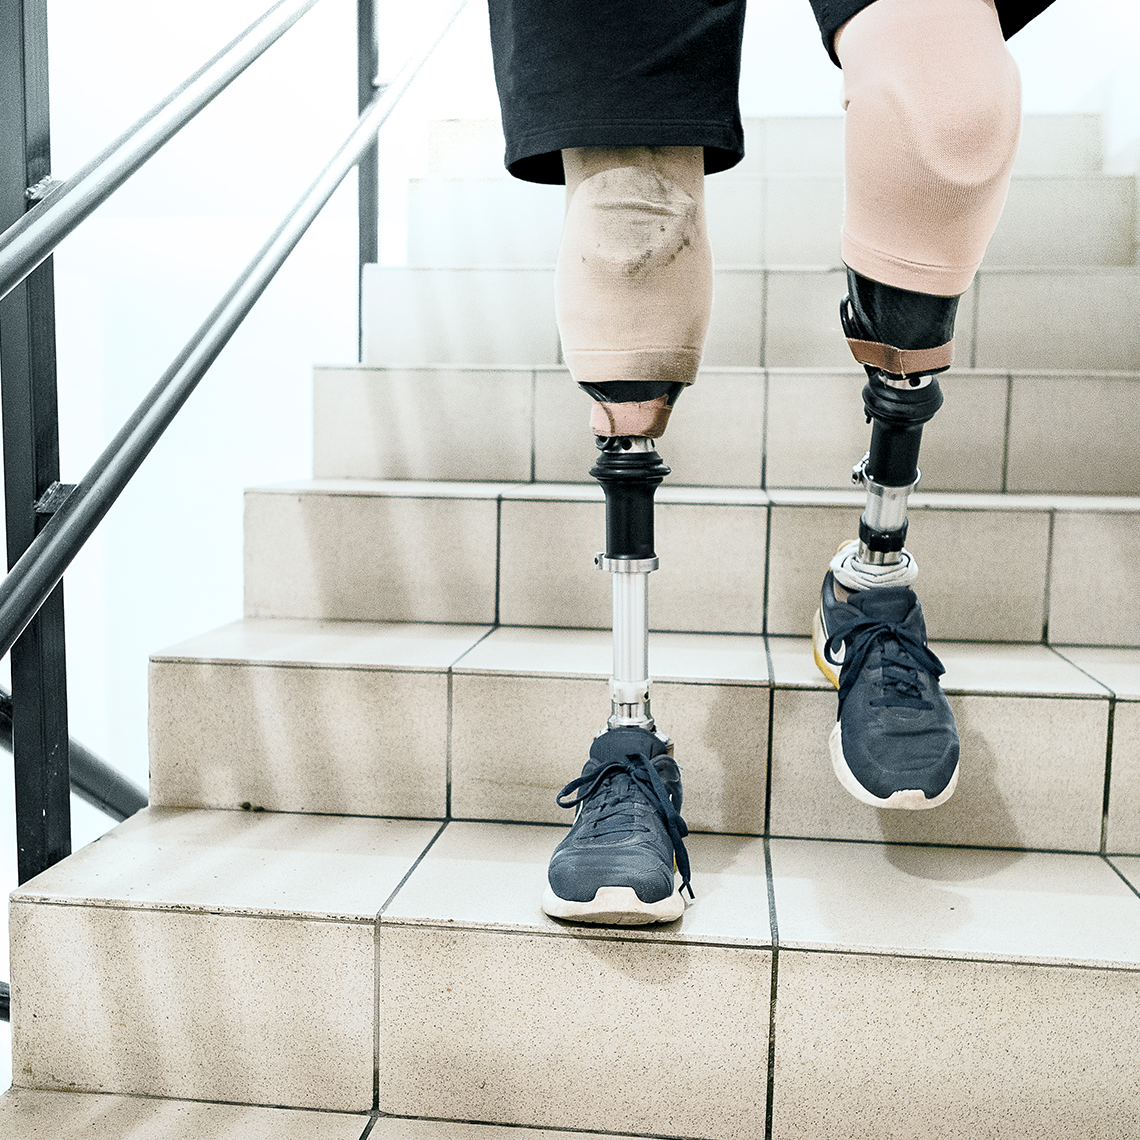 A person seen from the thighs down with two prosthetic legs descending a staircase.